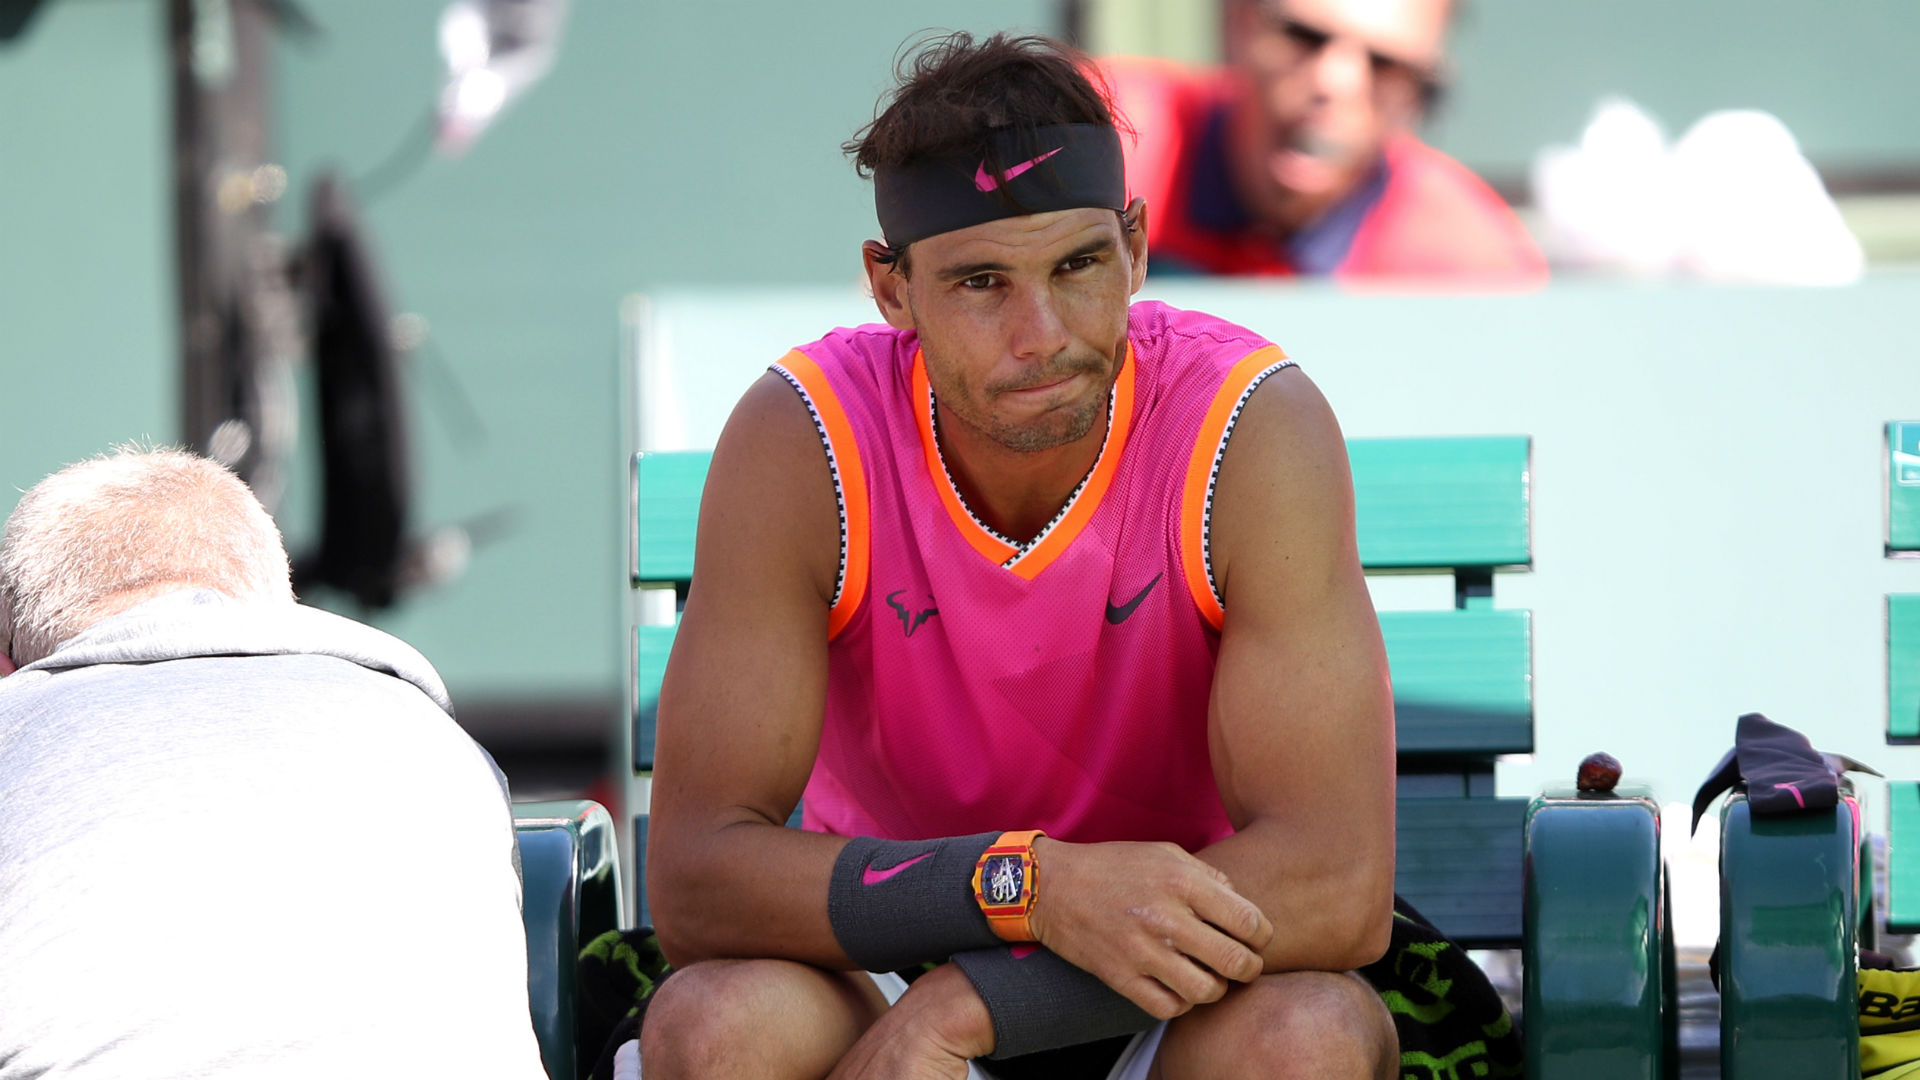 Just hours before he was set to face Roger Federer at the Indian Wells Masters, Rafael Nadal has withdrawn from the tournament.